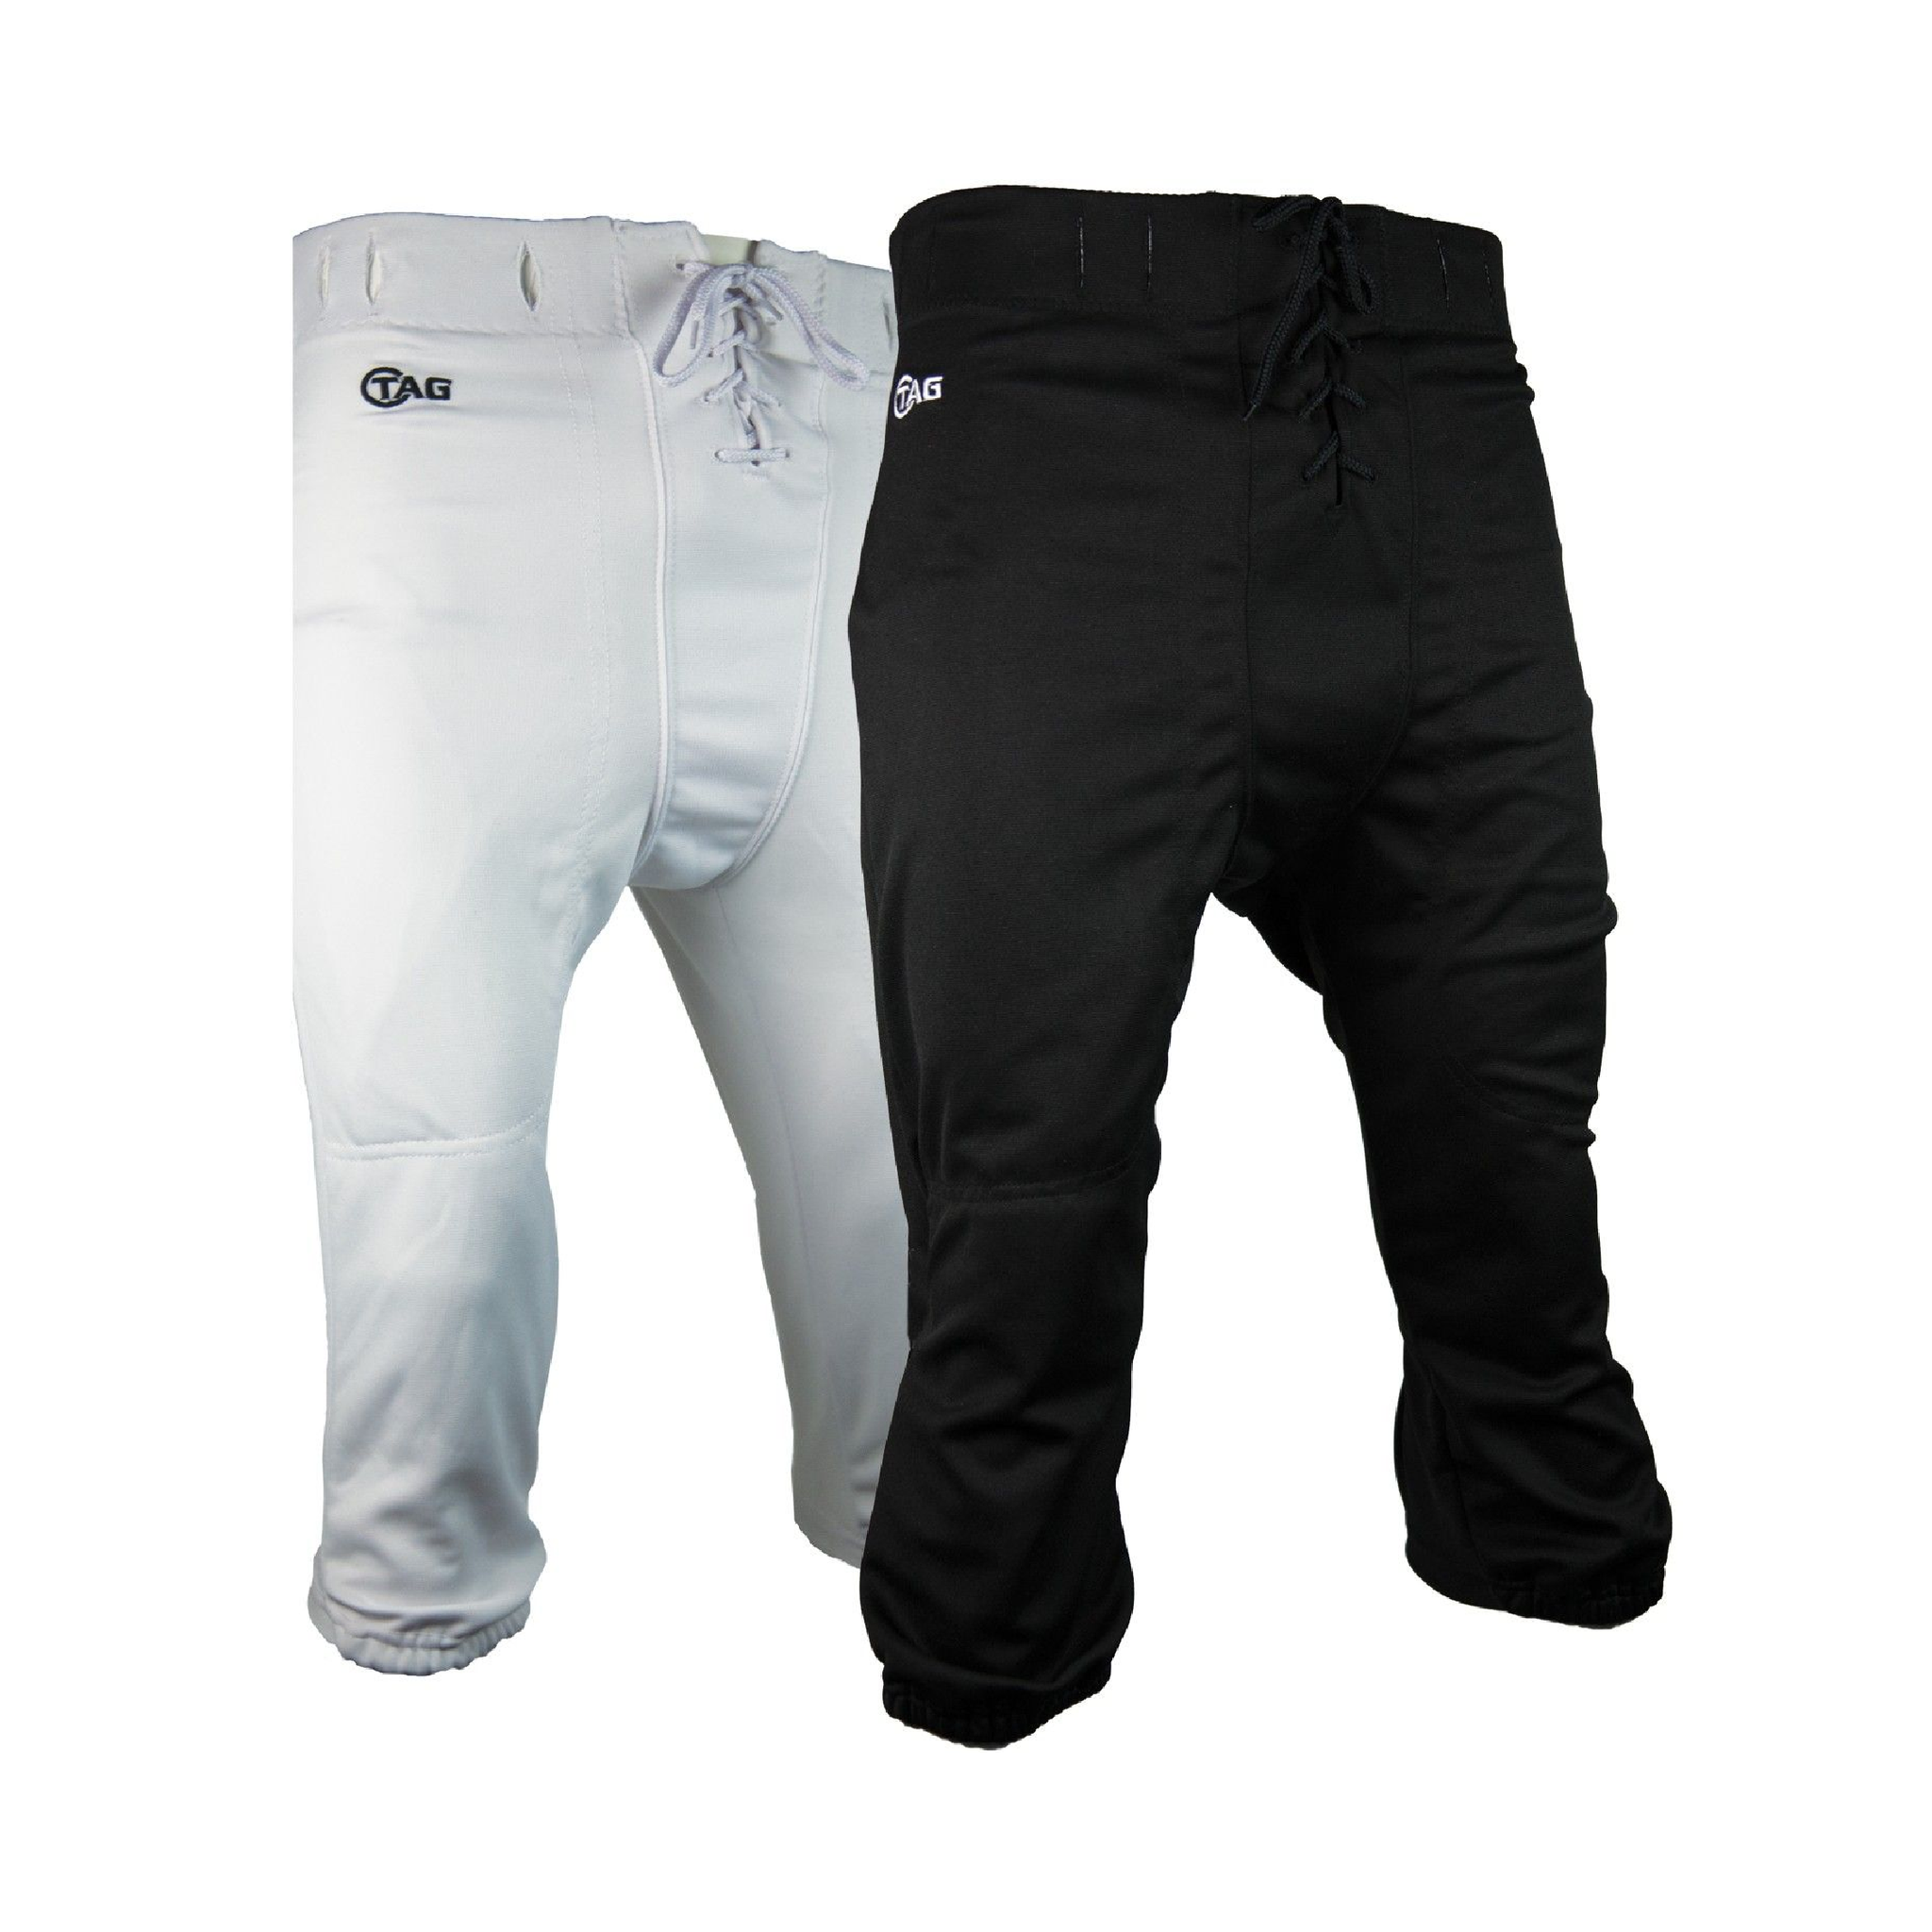 TAG Youth Slotted Football Practice Pant